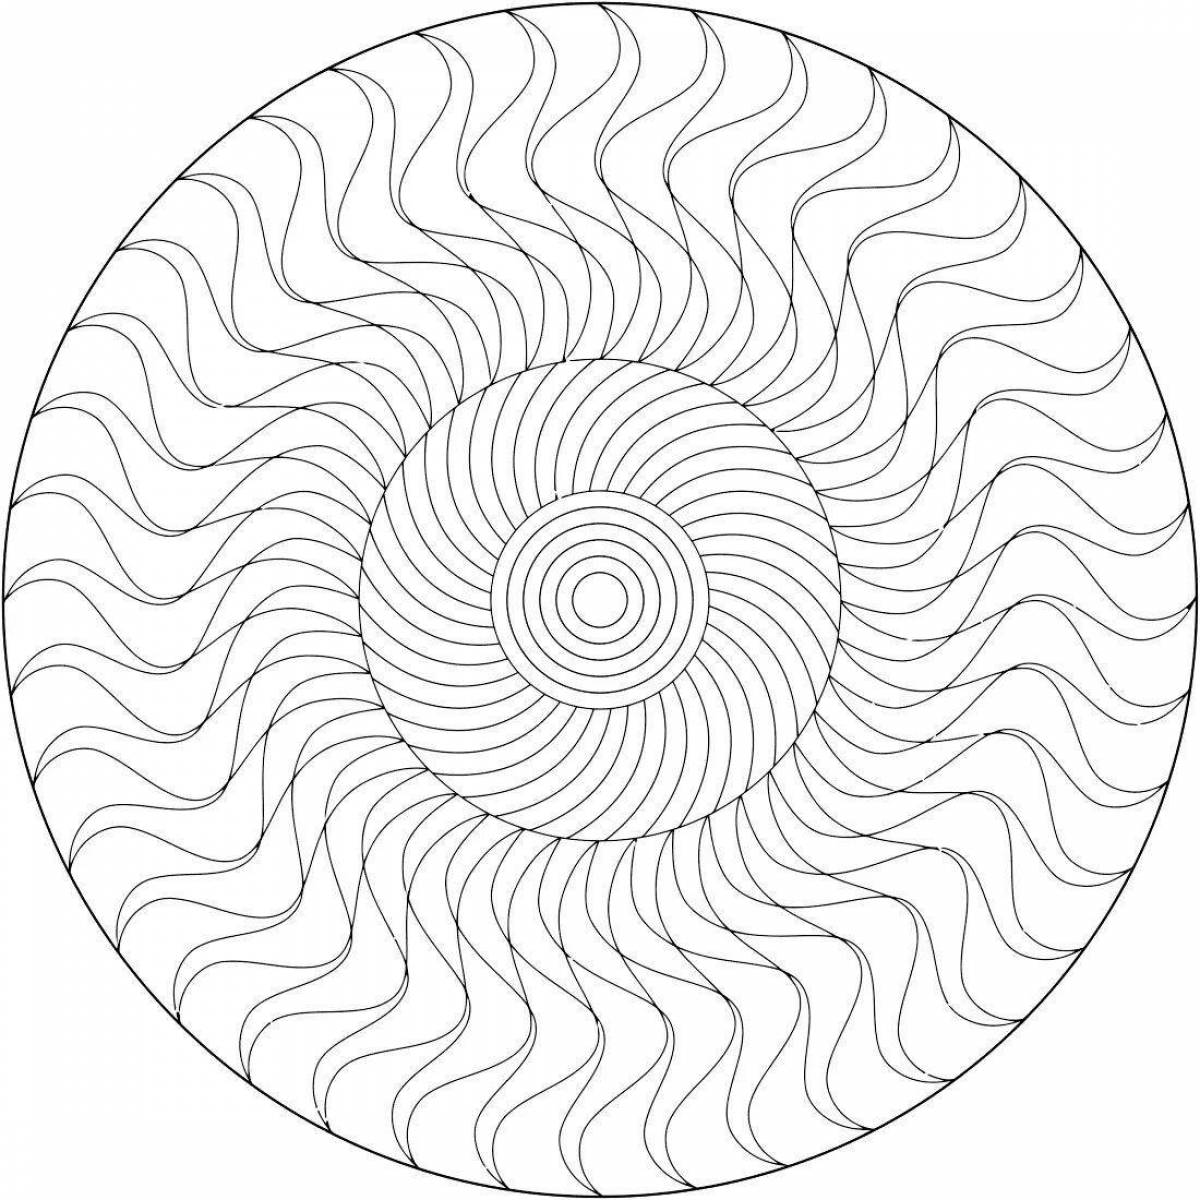 Playful striped circle coloring page